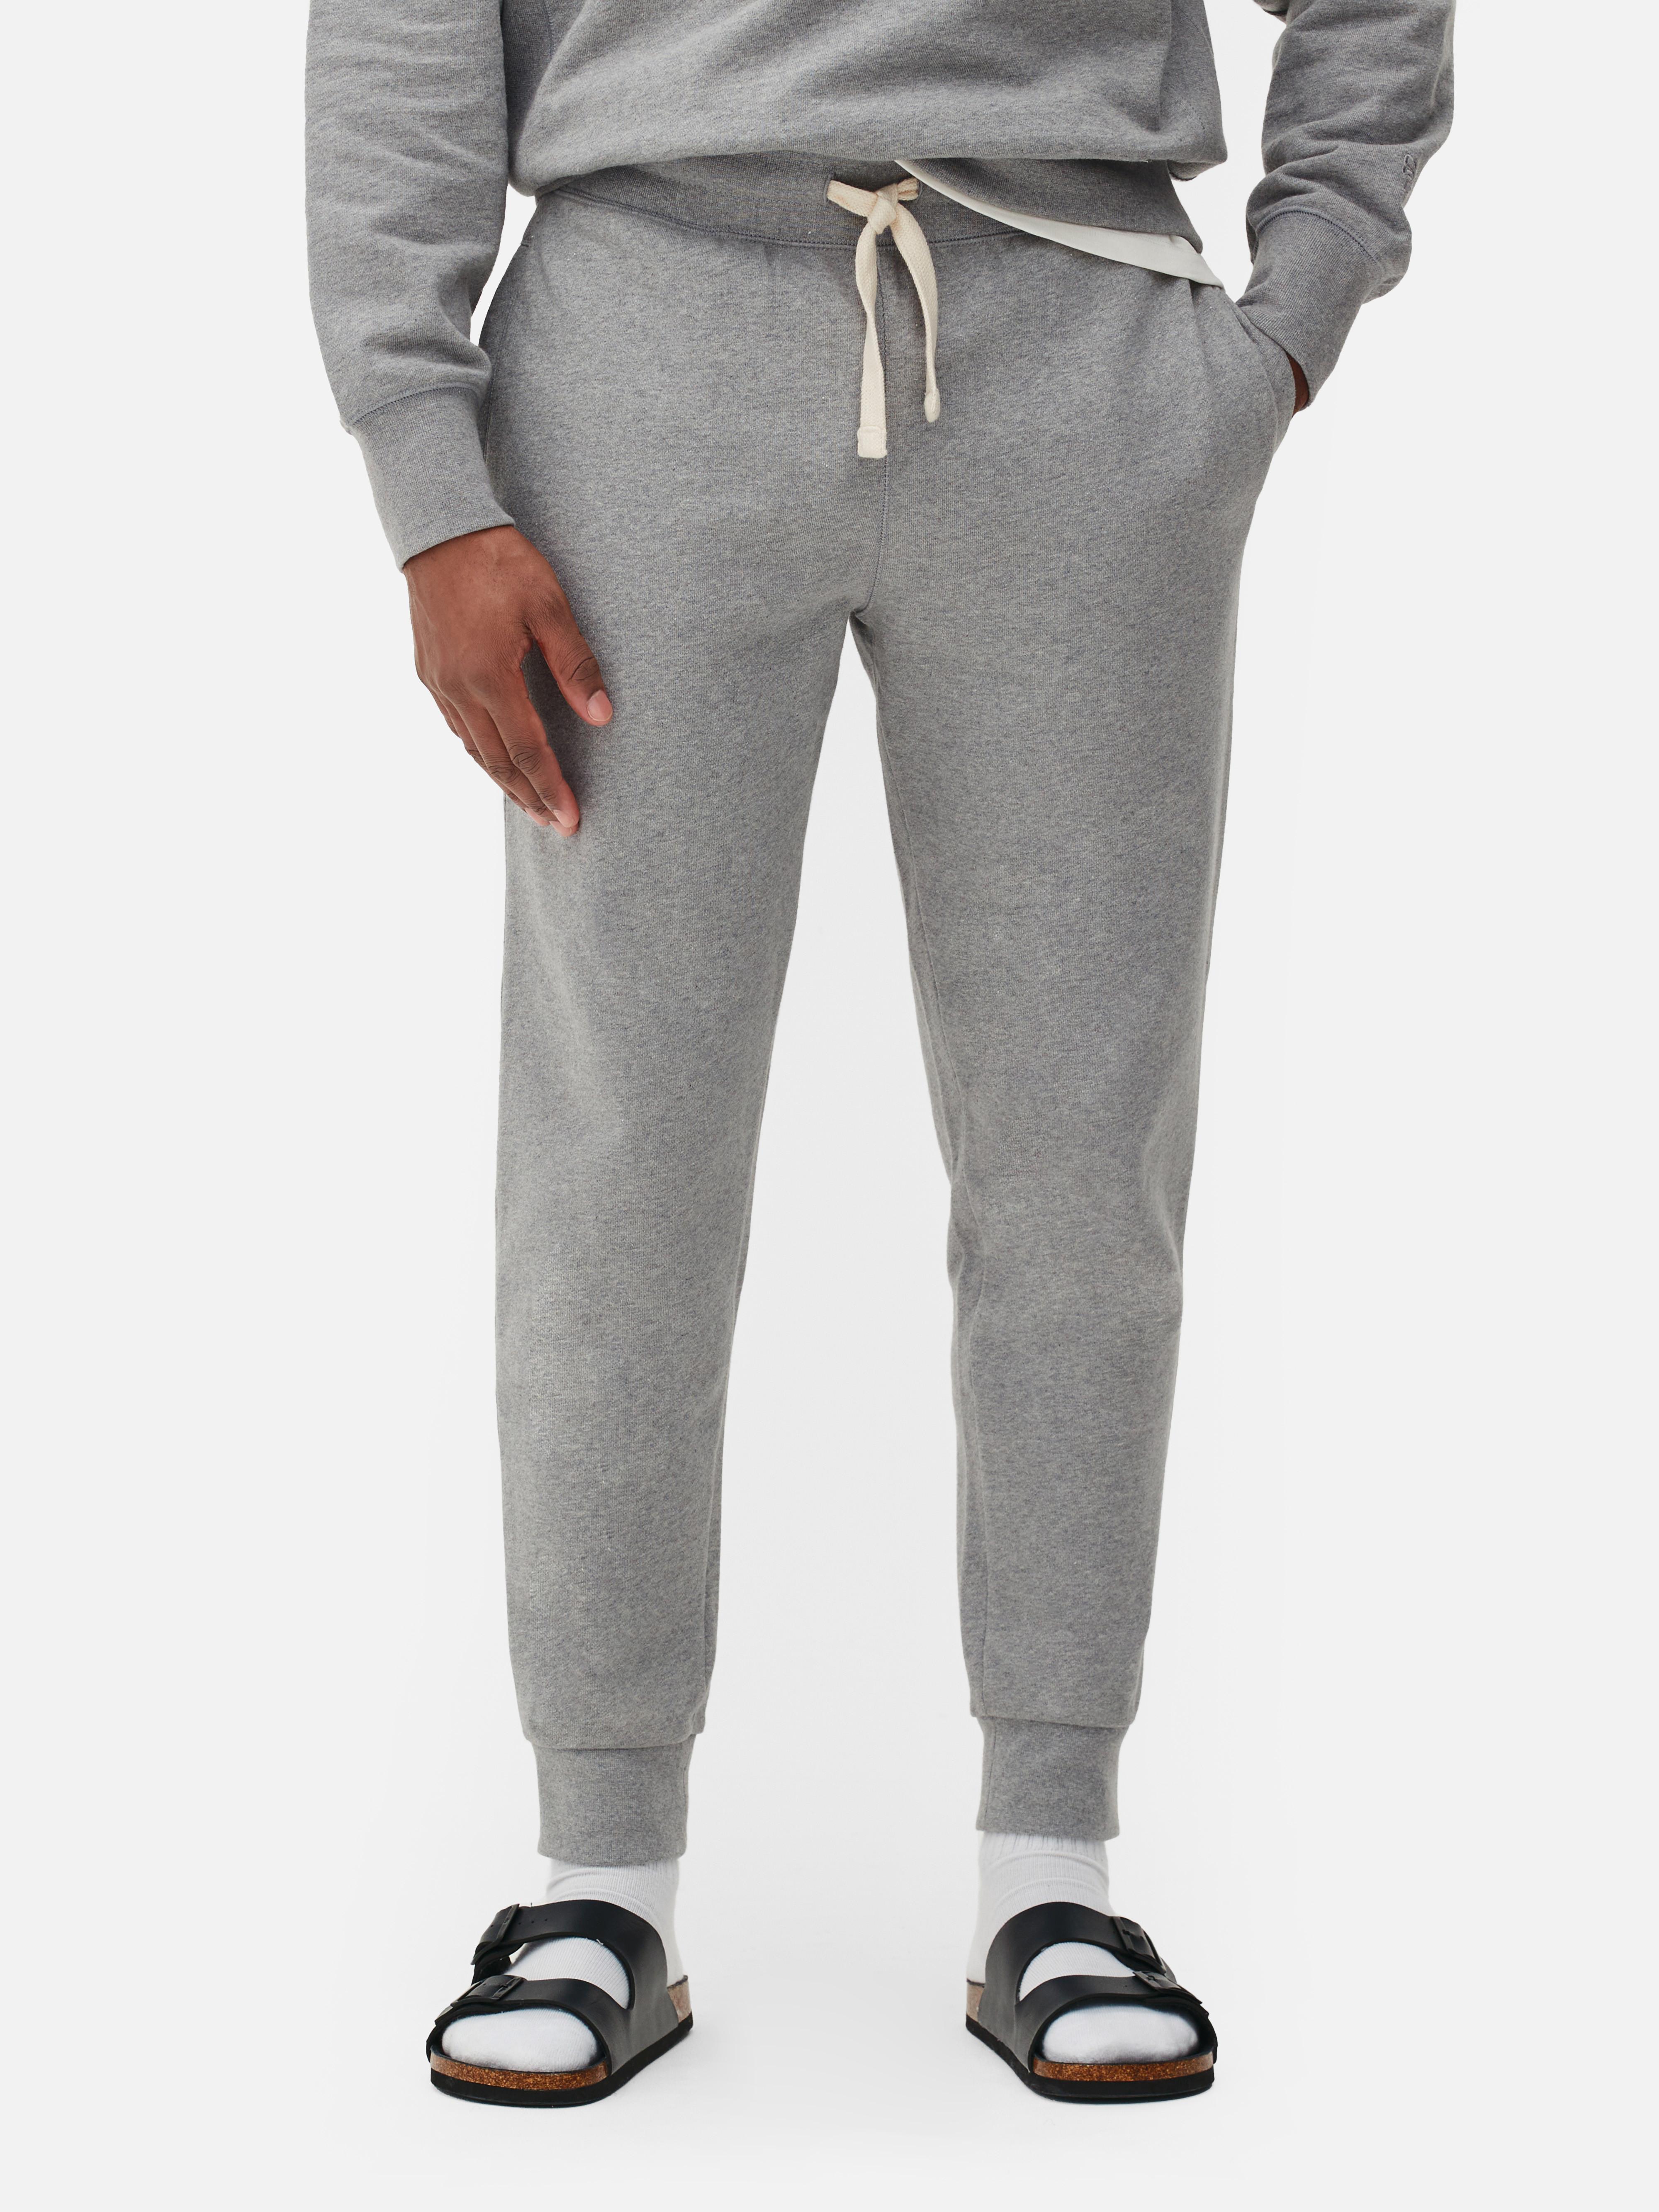 ON Tapered Sweatpants